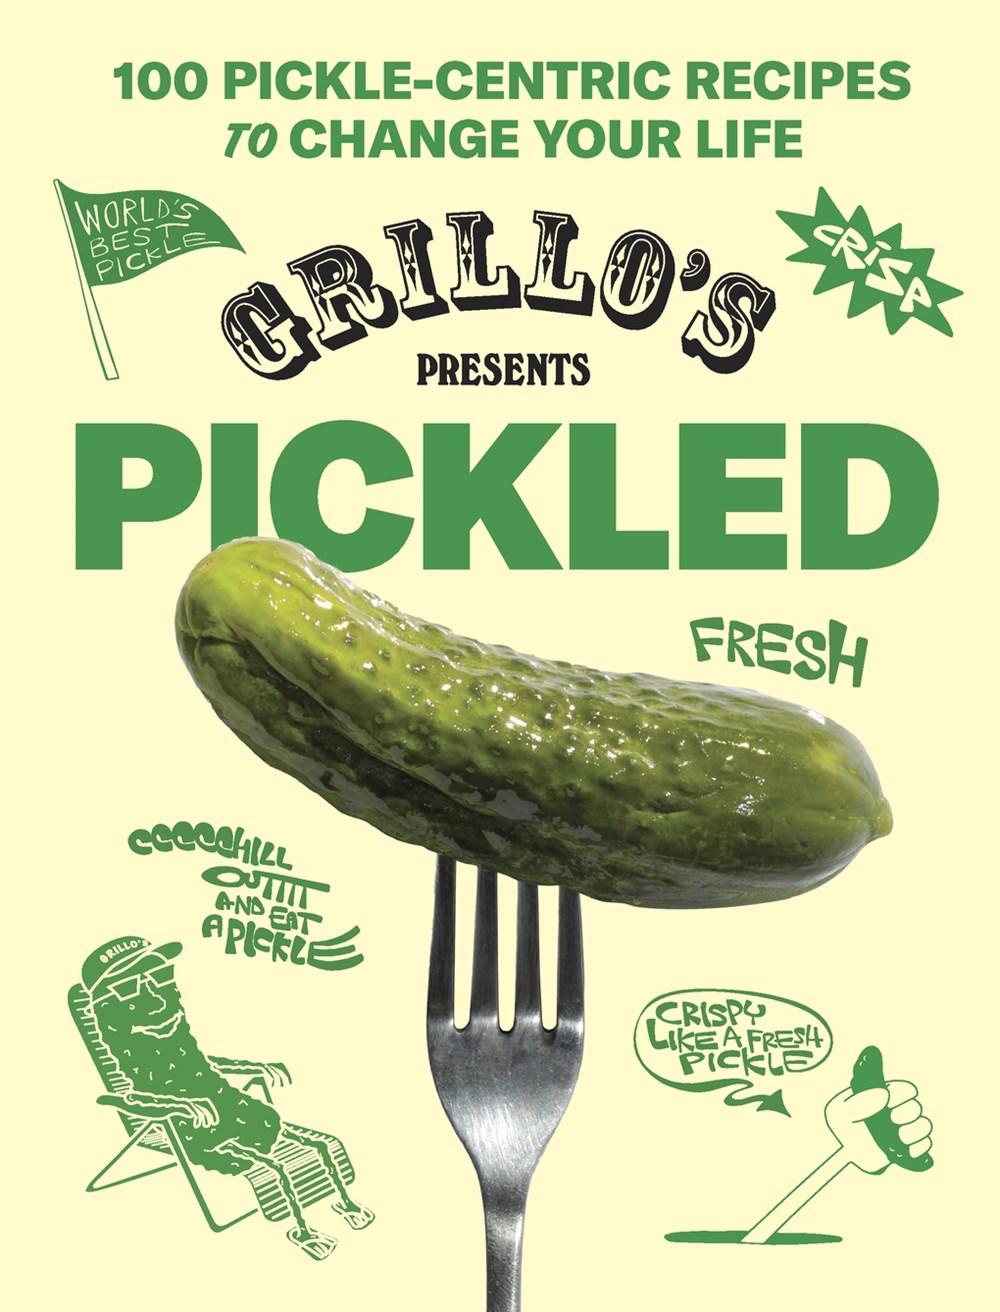 Grillo’s Presents Pickled: 100 Pickle-Centric Recipes To Change Your Life